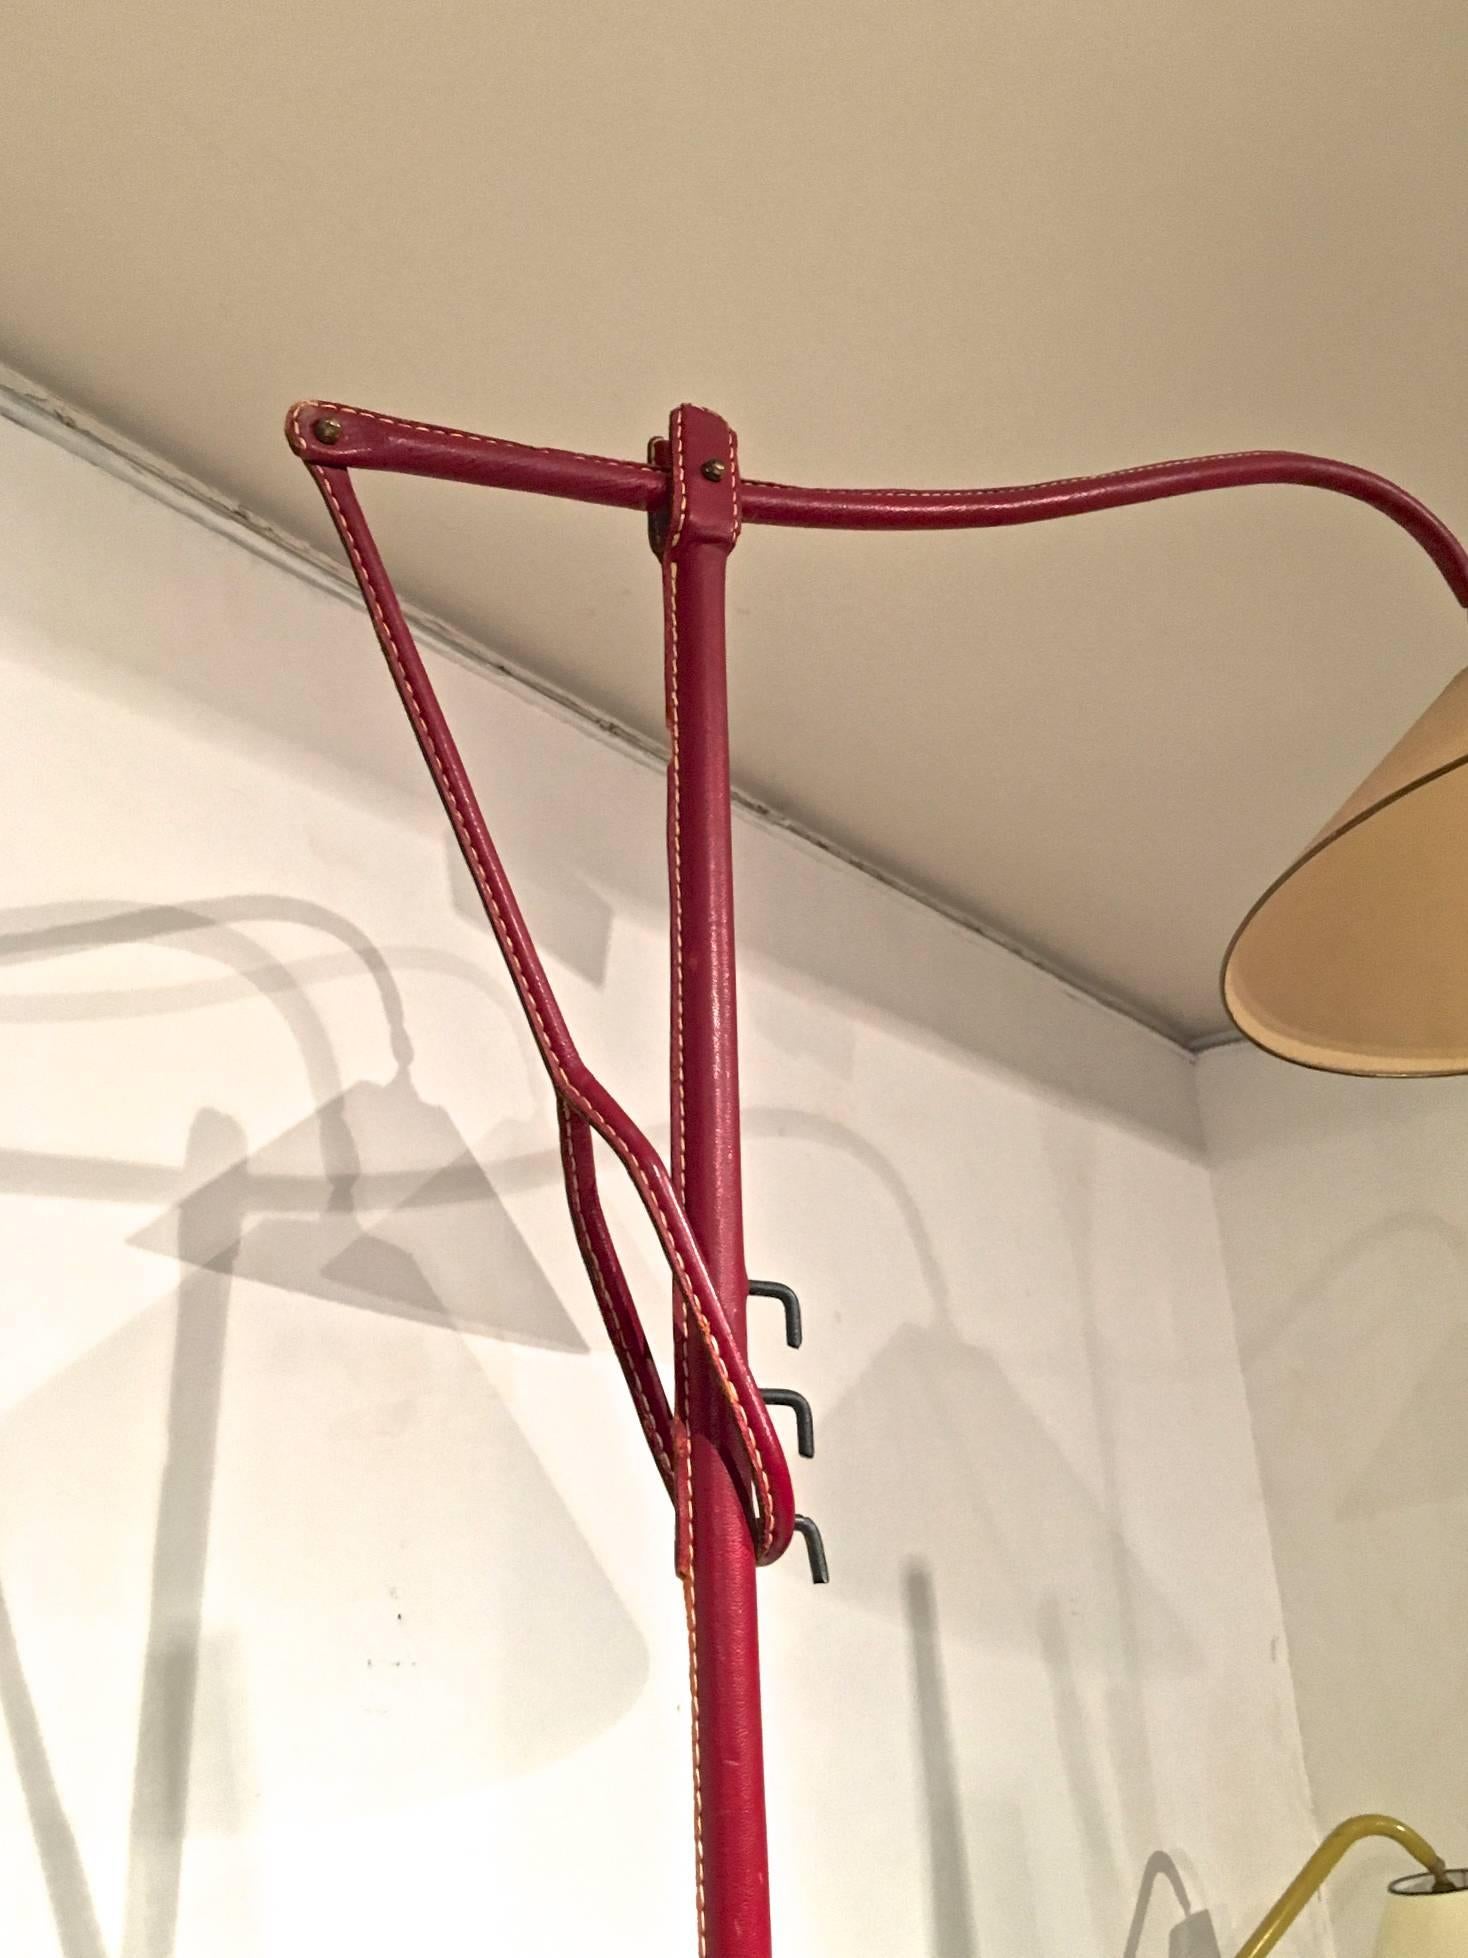 Mid-Century Modern Jacques Adnet Hand-Stitched Leather Reclining Floor Lamp  in Red Hermès Color